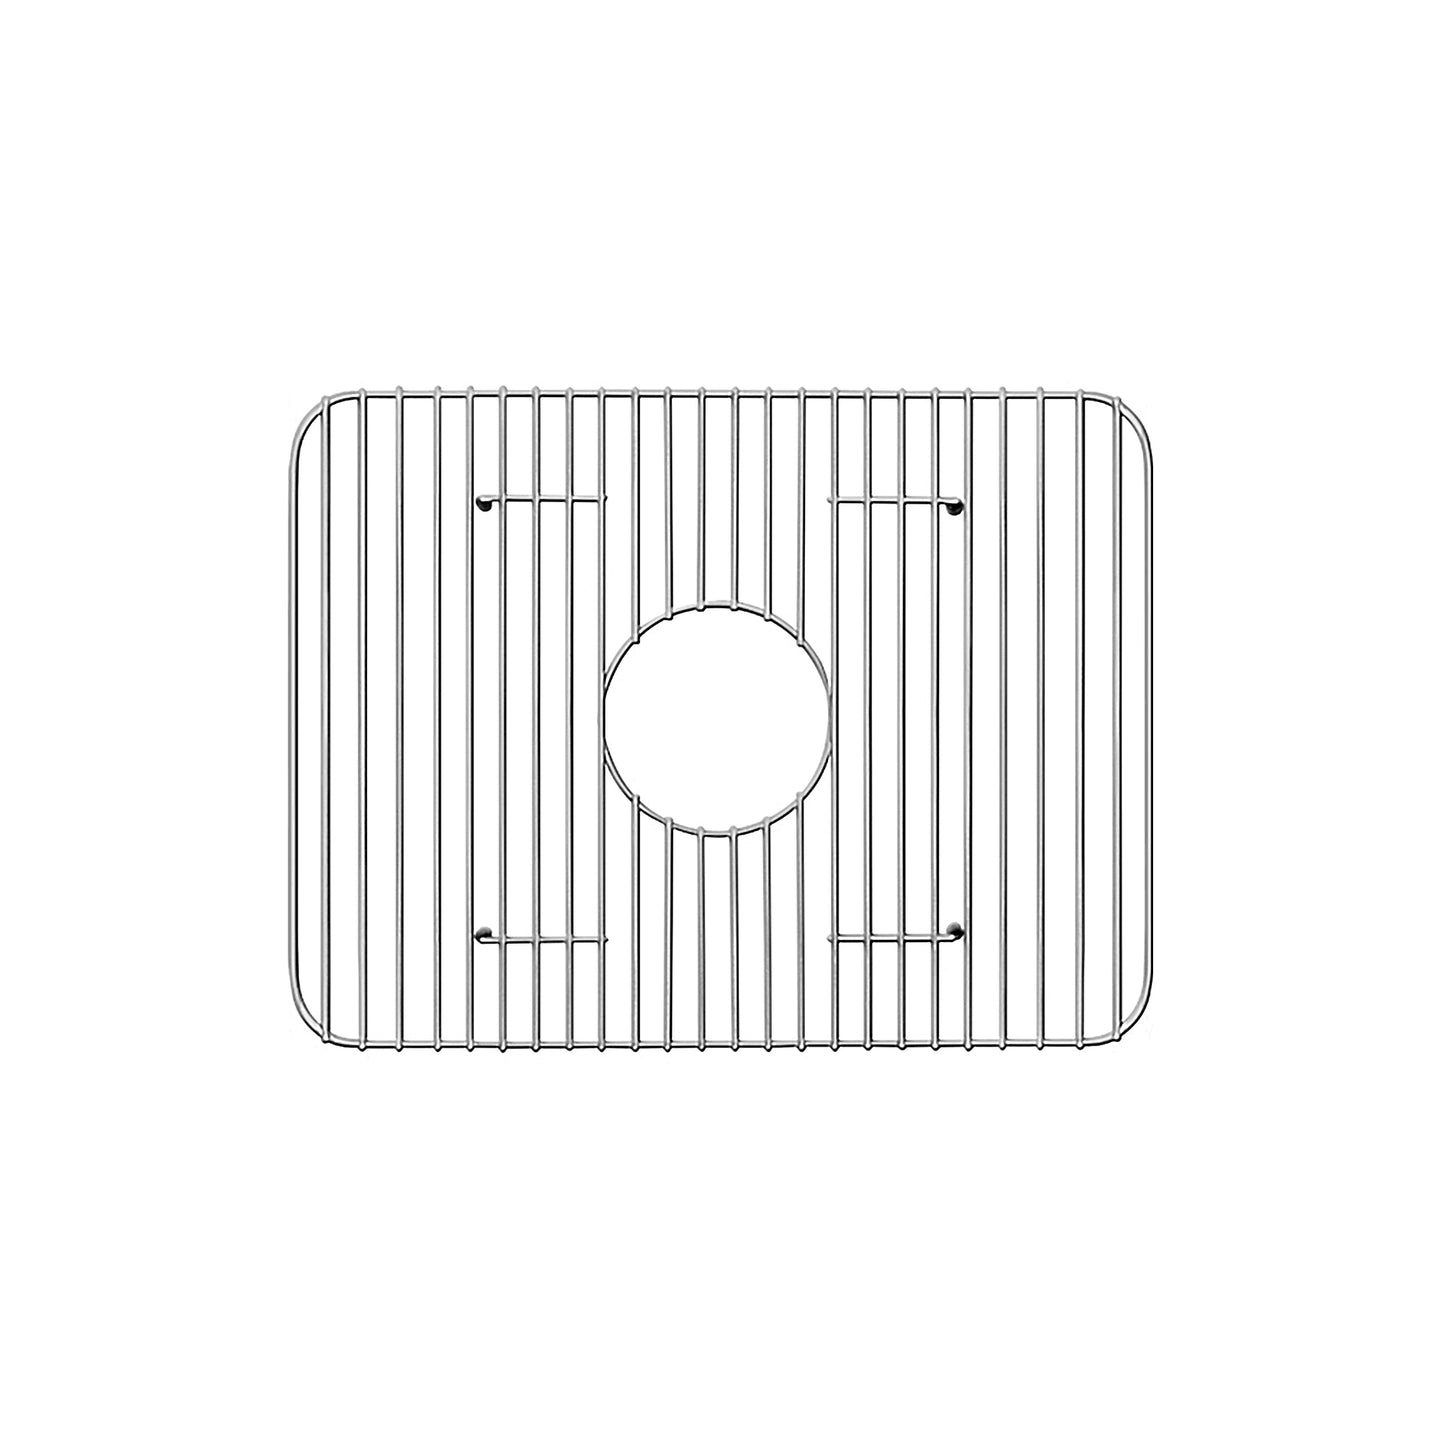 Whitehaus Stainless Steel Large Sink Grid for use with Fireclay Sink Model WHQDB5542